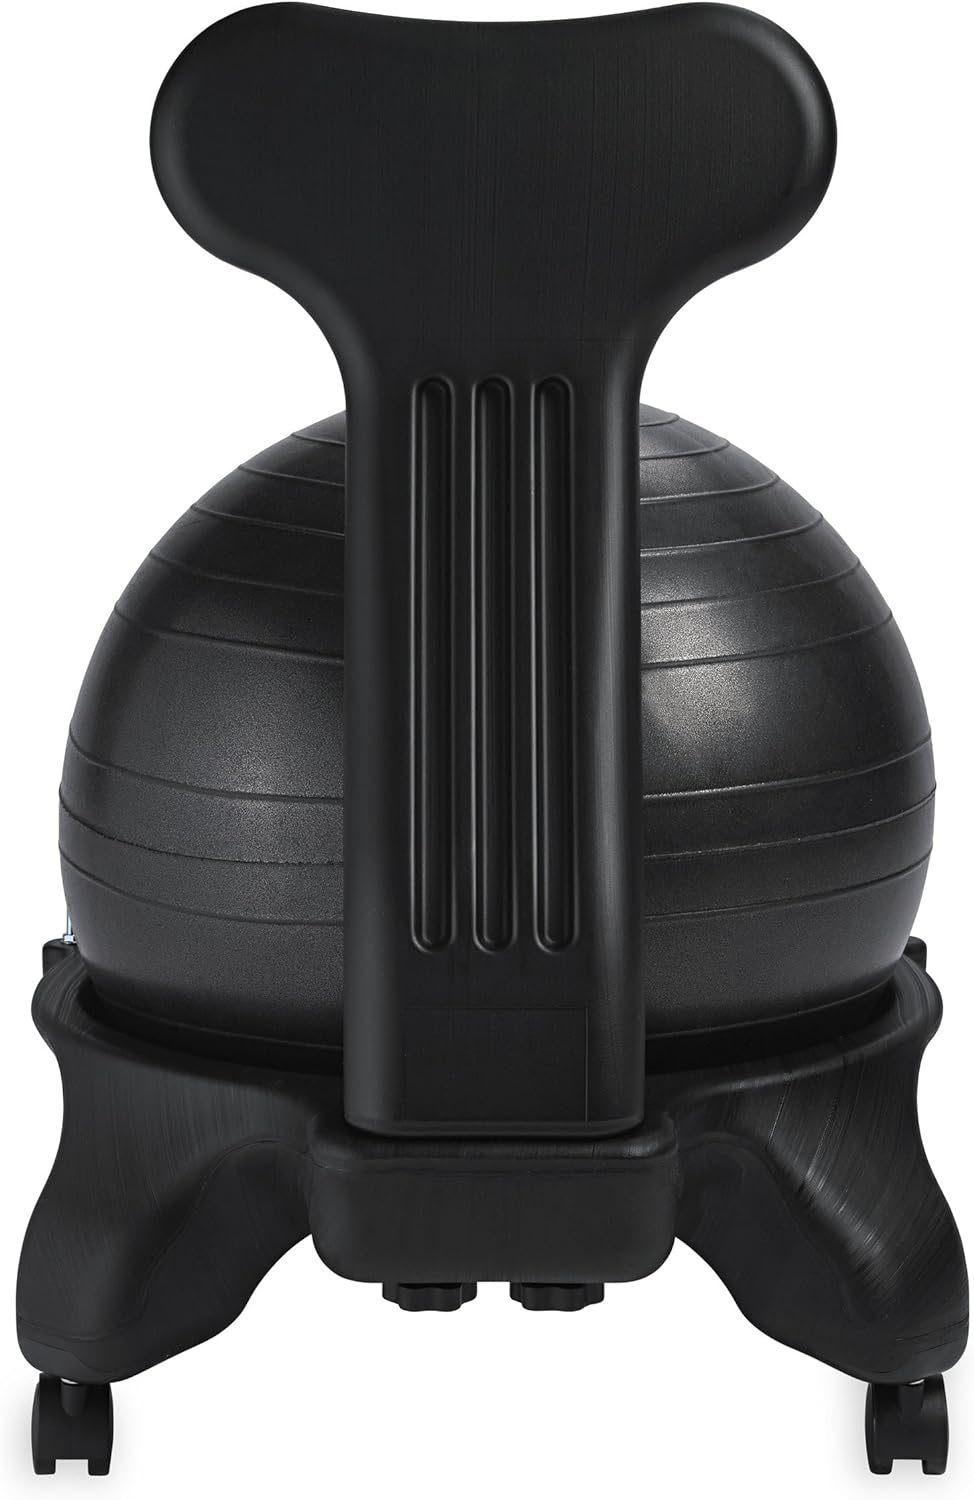 Gaiam Classic Balance Ball Chair \u2013 Exercise Stability Yoga Ball Premium Ergonomic Chair for Home and Office Desk with Air Pump, Exercise Guide and Satisfaction Guarantee